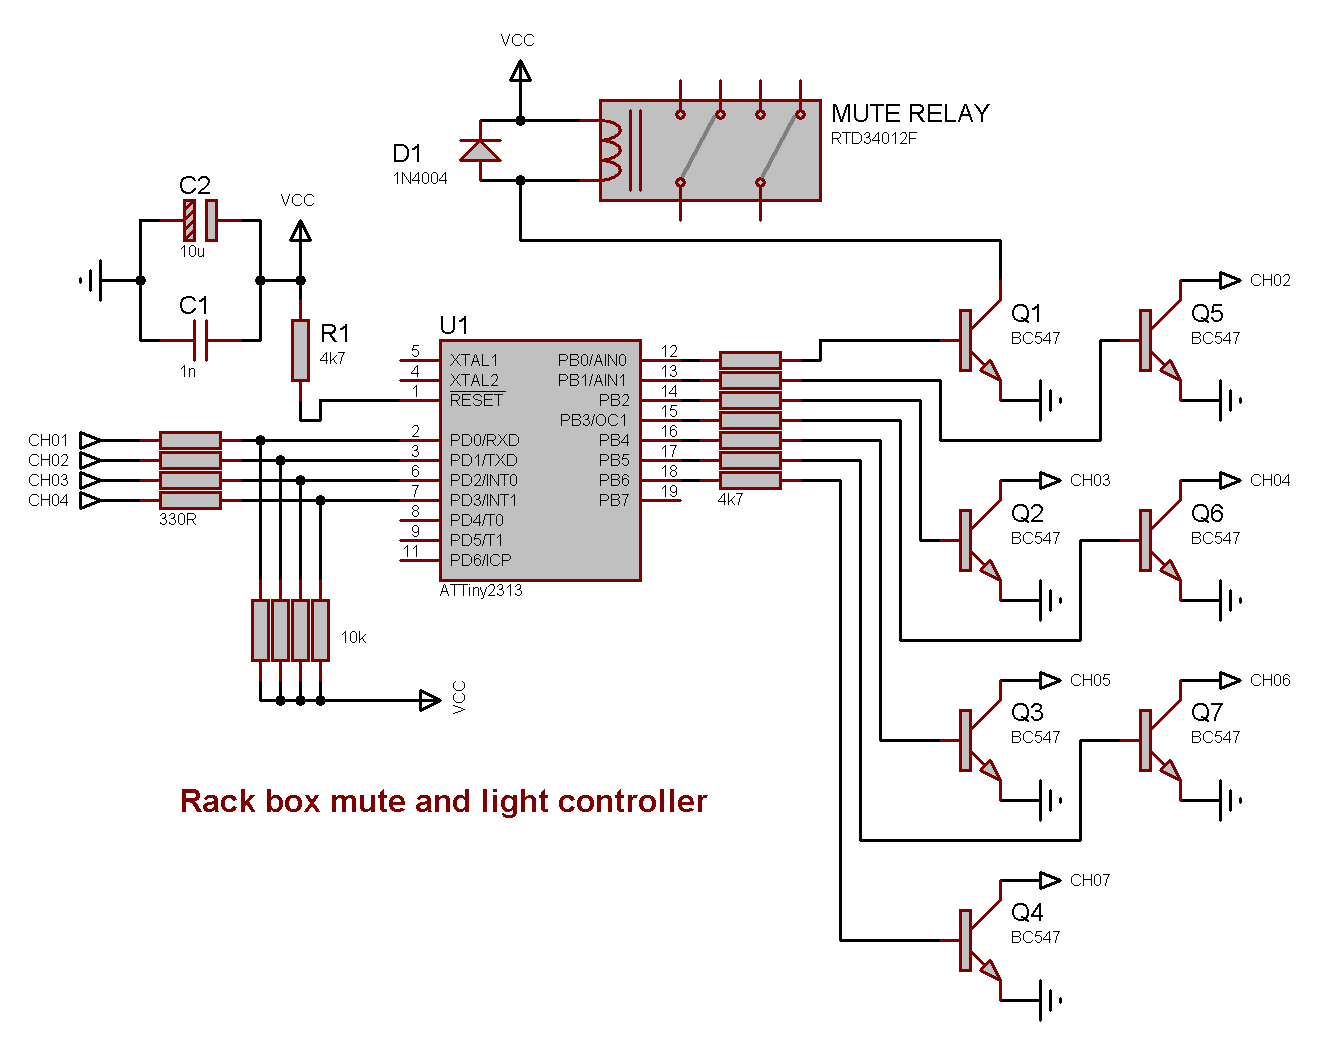 Schematics for the mute and light controller